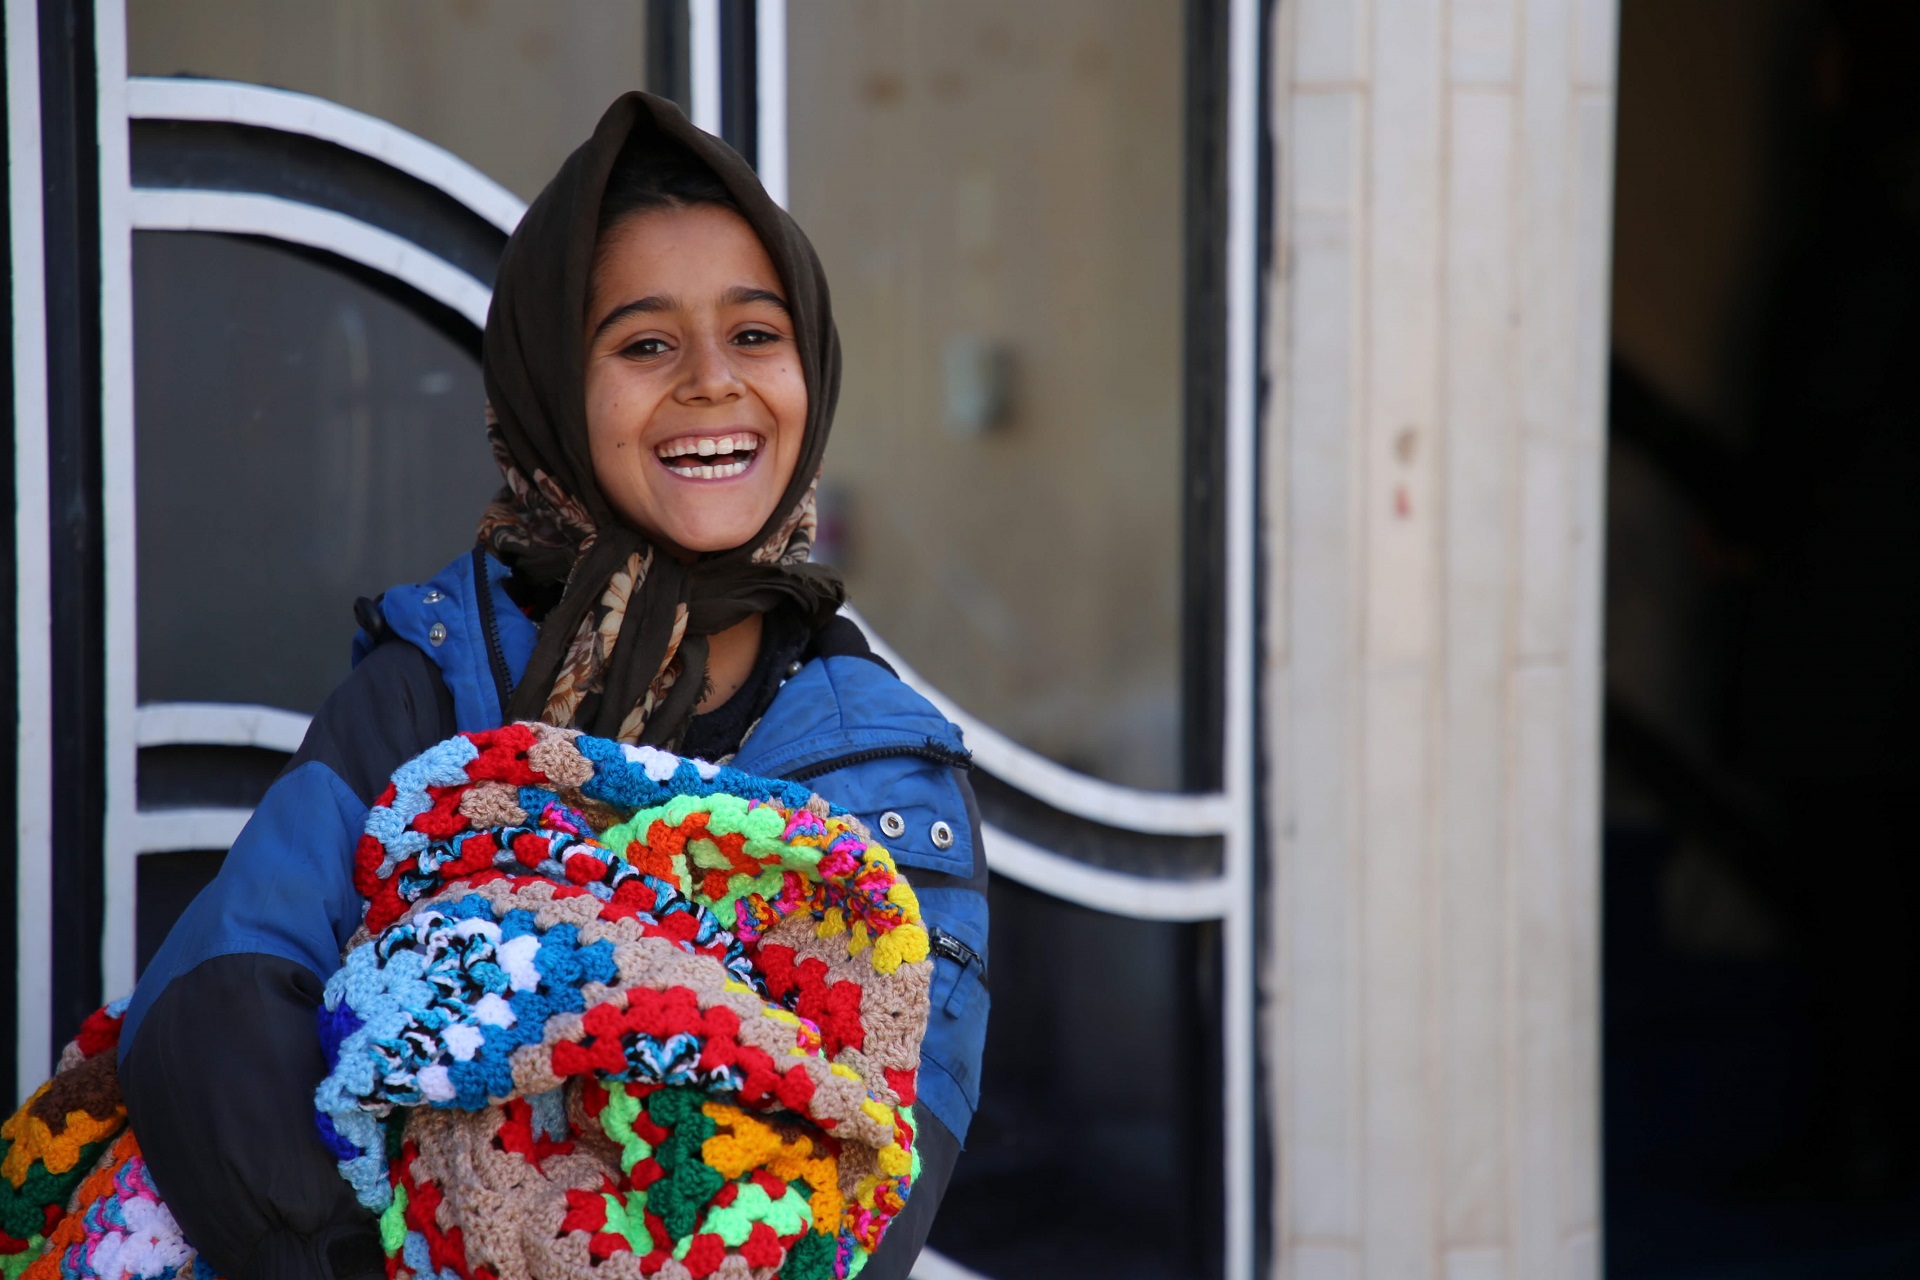 Ibrahim, 10, Surprised & Happy To Receive A Woolen Wrap